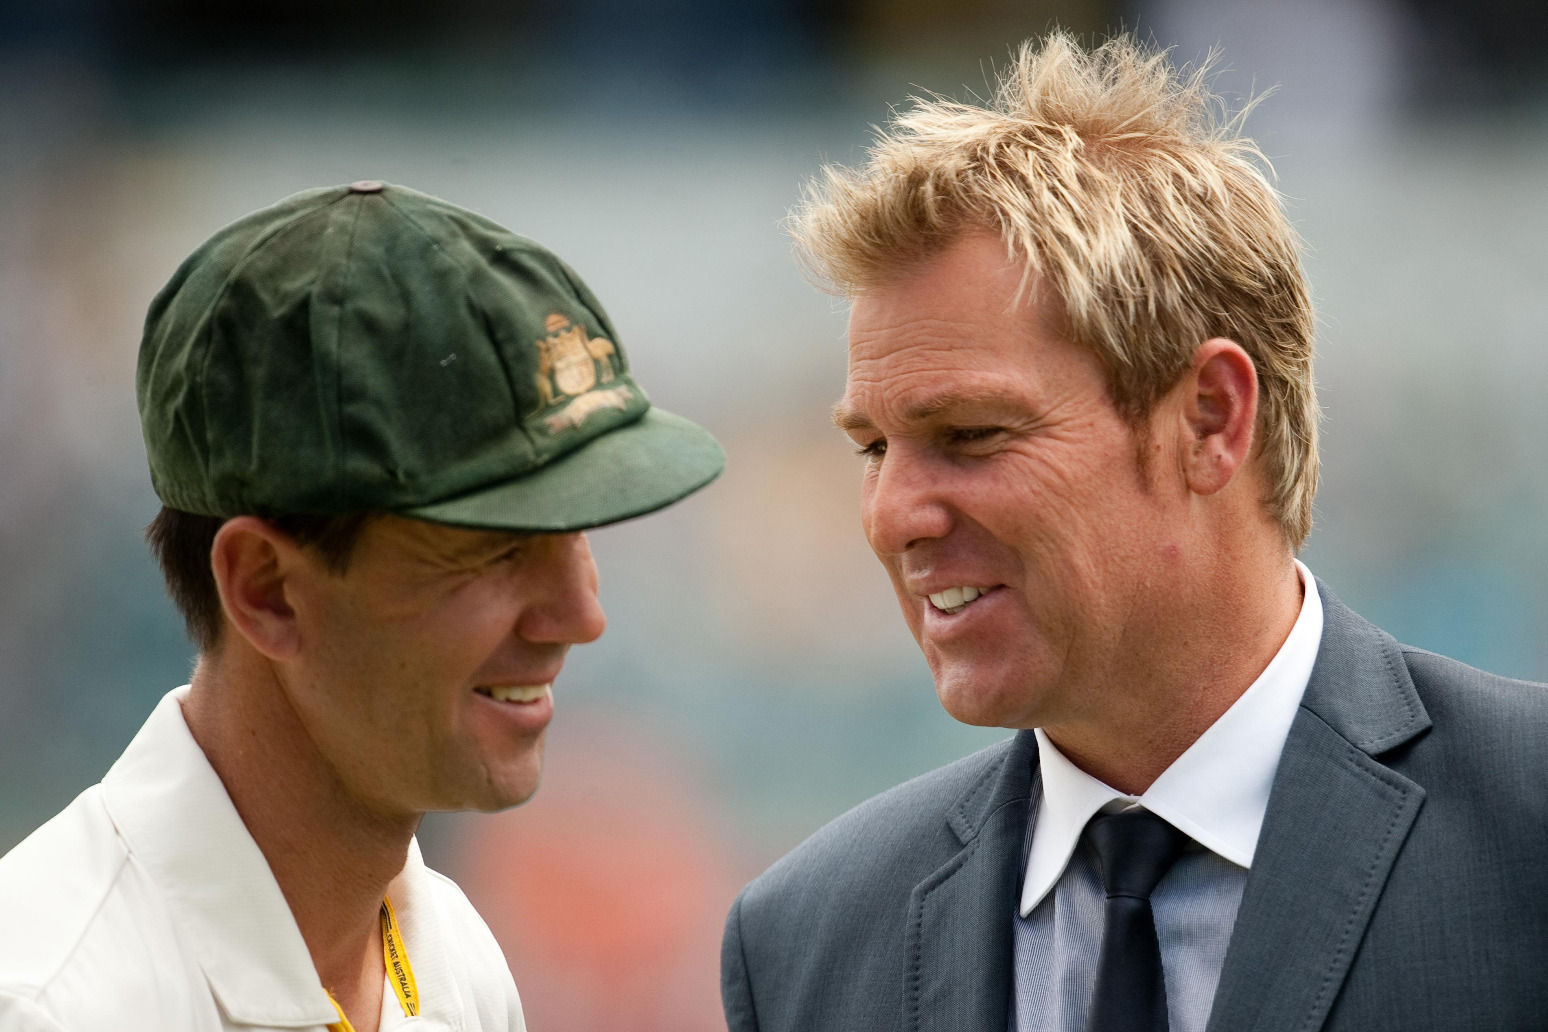 Shane Warne’s state memorial to be held at Melbourne Cricket Ground 